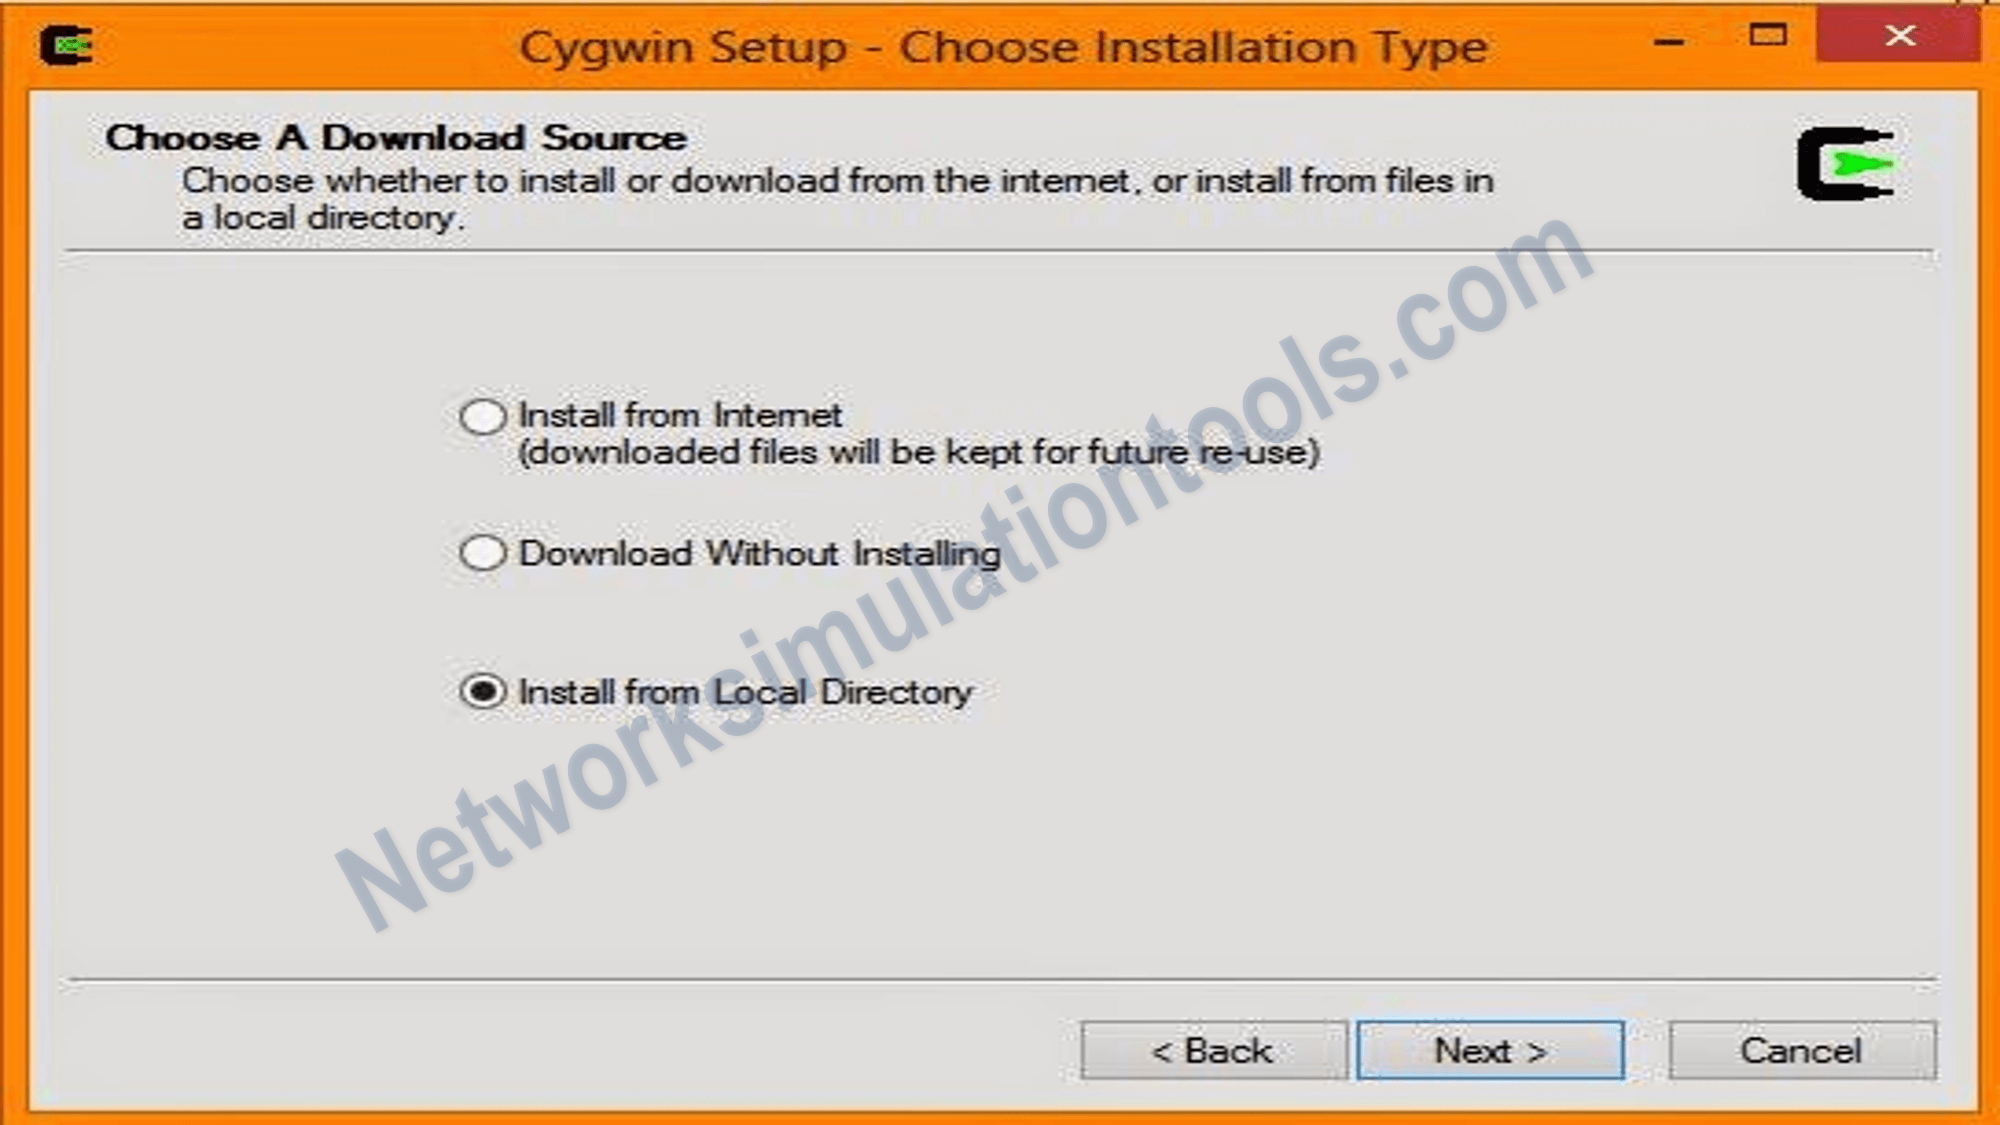 NS2 installation steps in Cygwin